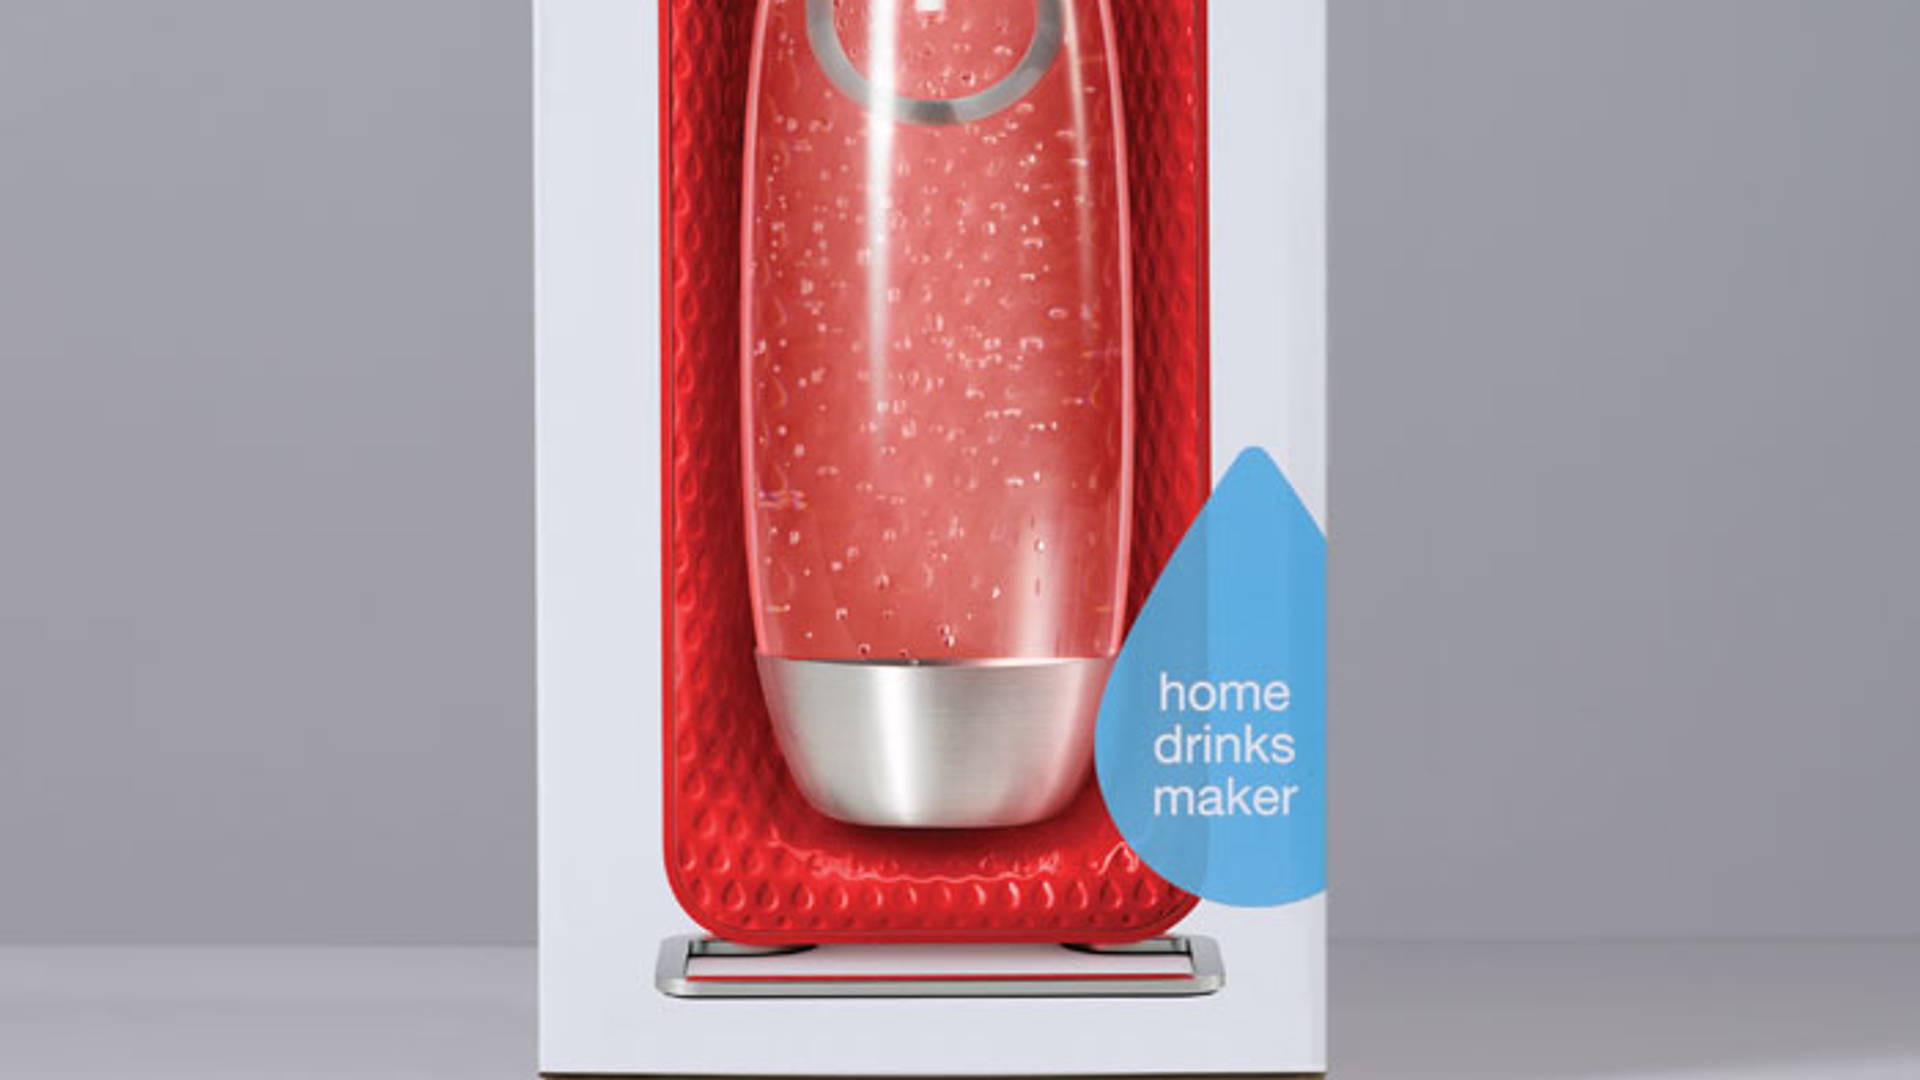 Featured image for The Dieline Package Design Awards 2013: Home, Garden, & Pet, 3rd Place - Soda Stream Source Packaging 